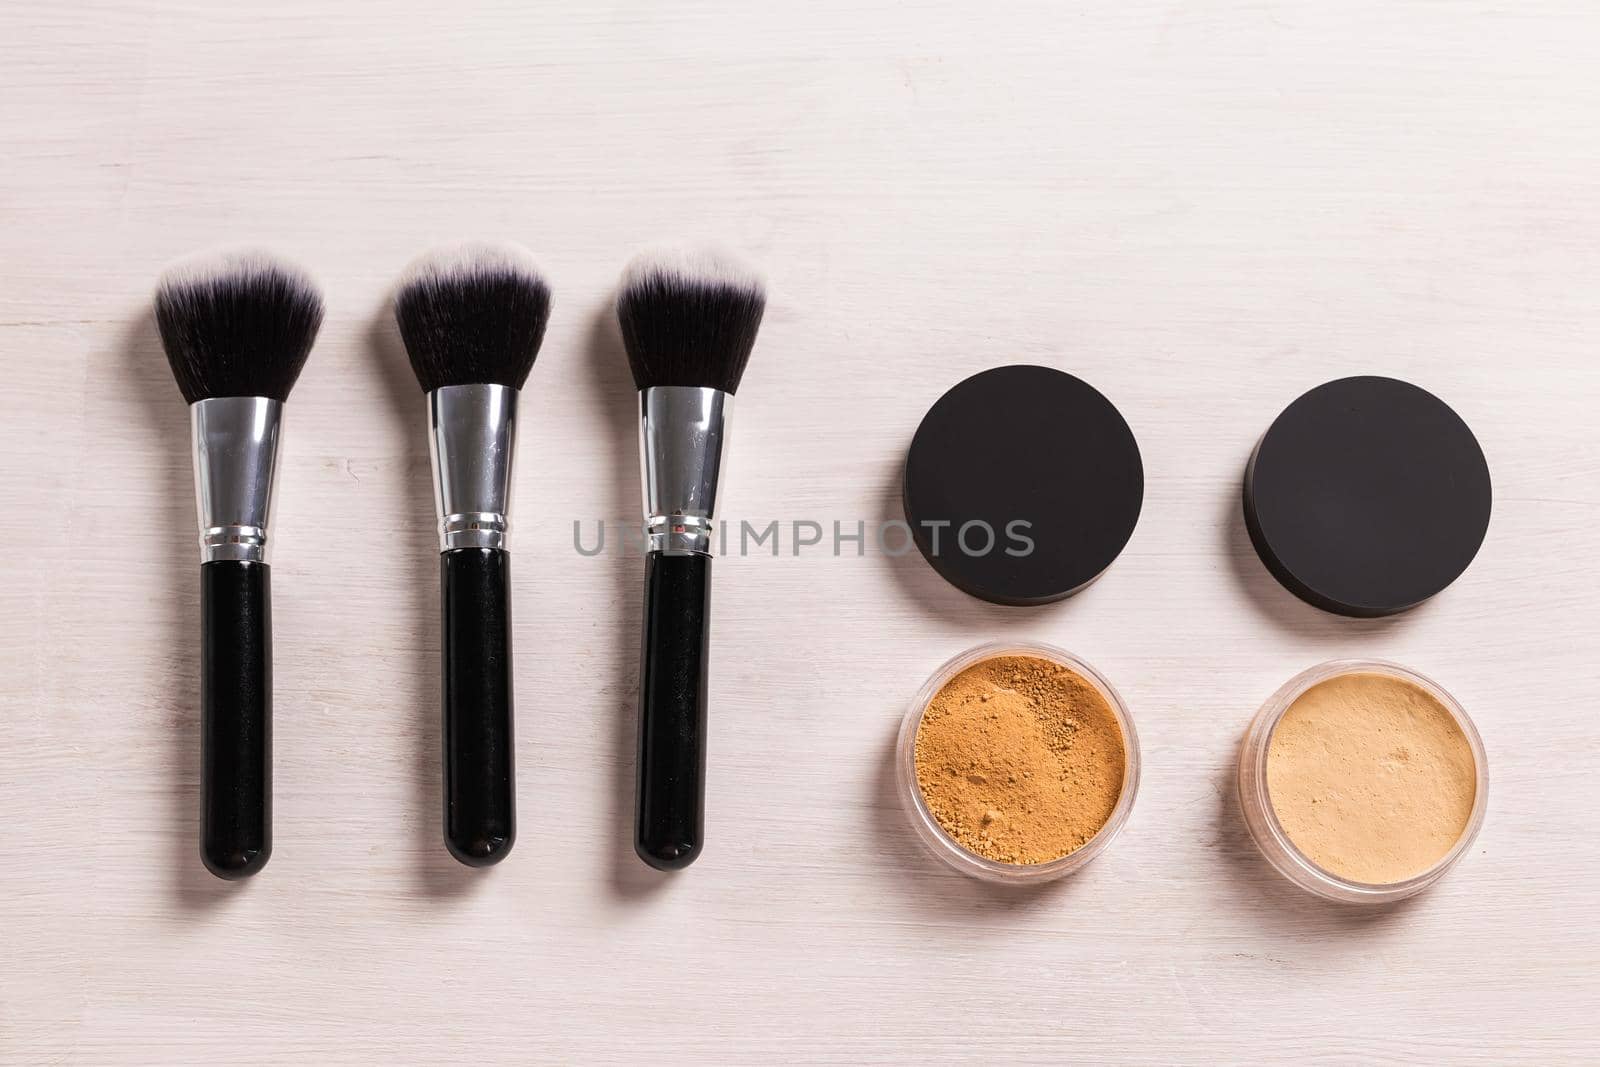 Mineral face powder and brushes. Eco-friendly and organic beauty products by Satura86